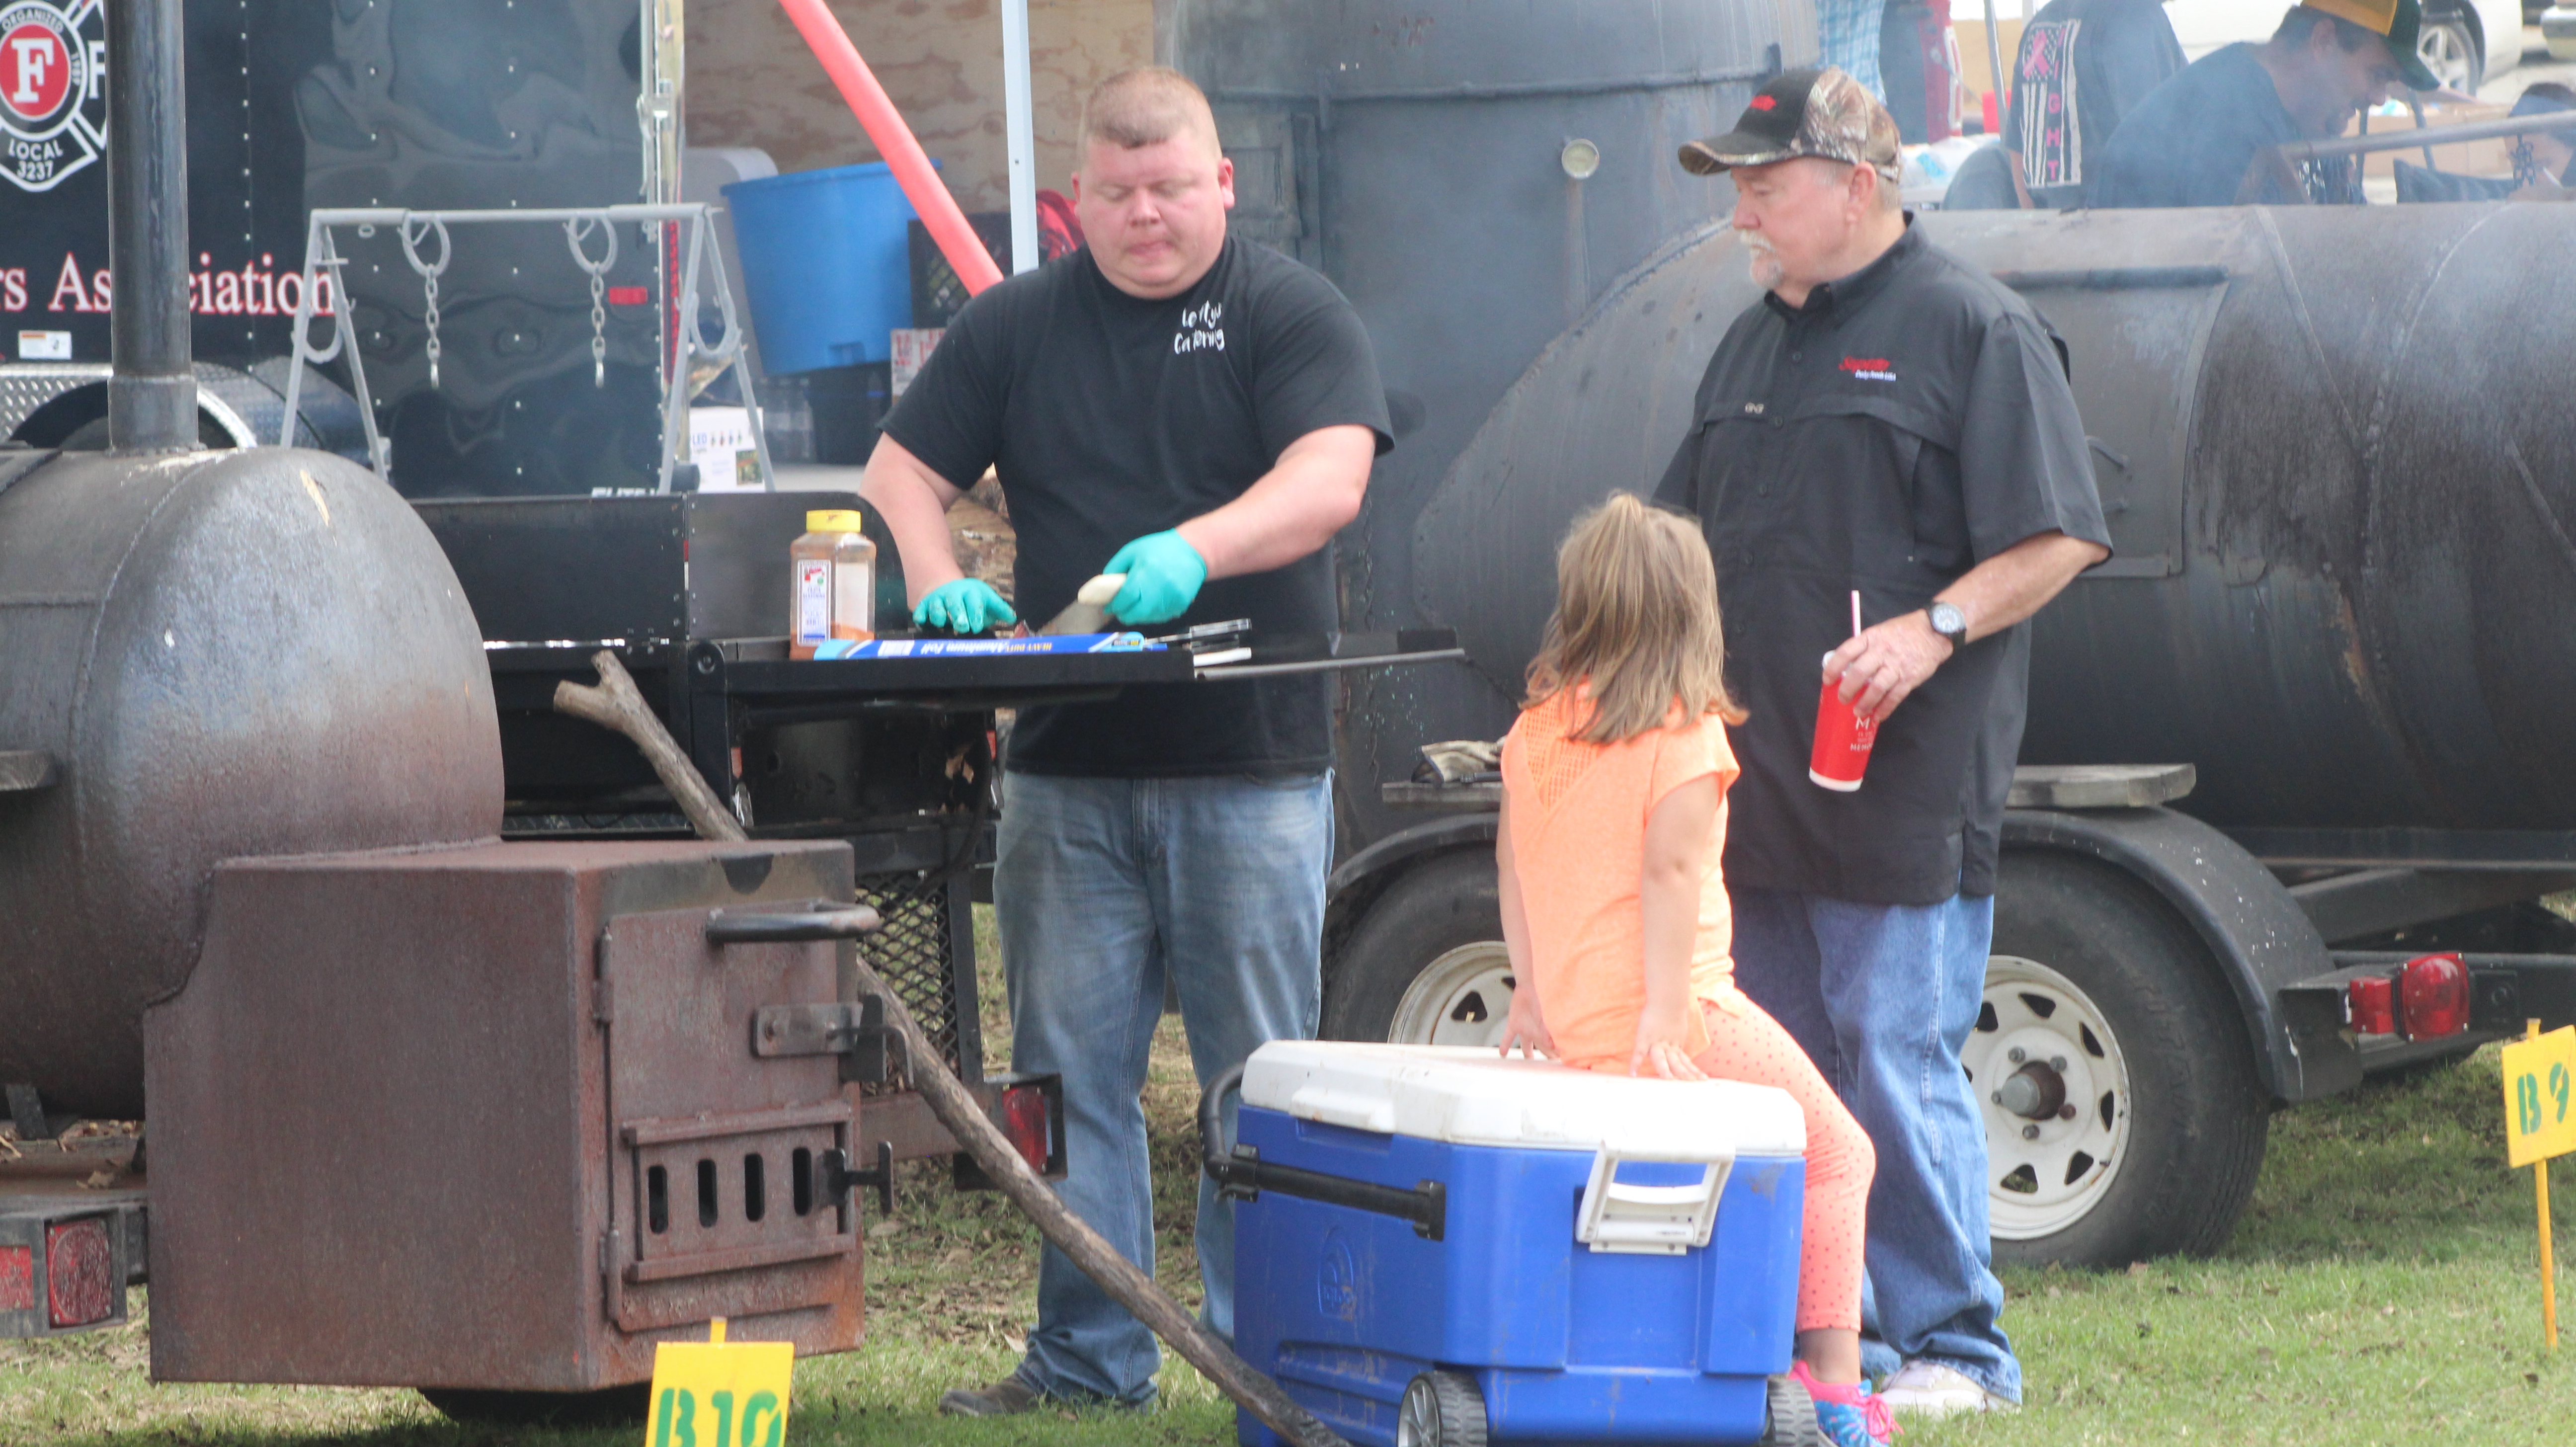 Help-A-Child 10th Annual Tractor Pull and Chili & Brisket Cook-Off Held this Weekend